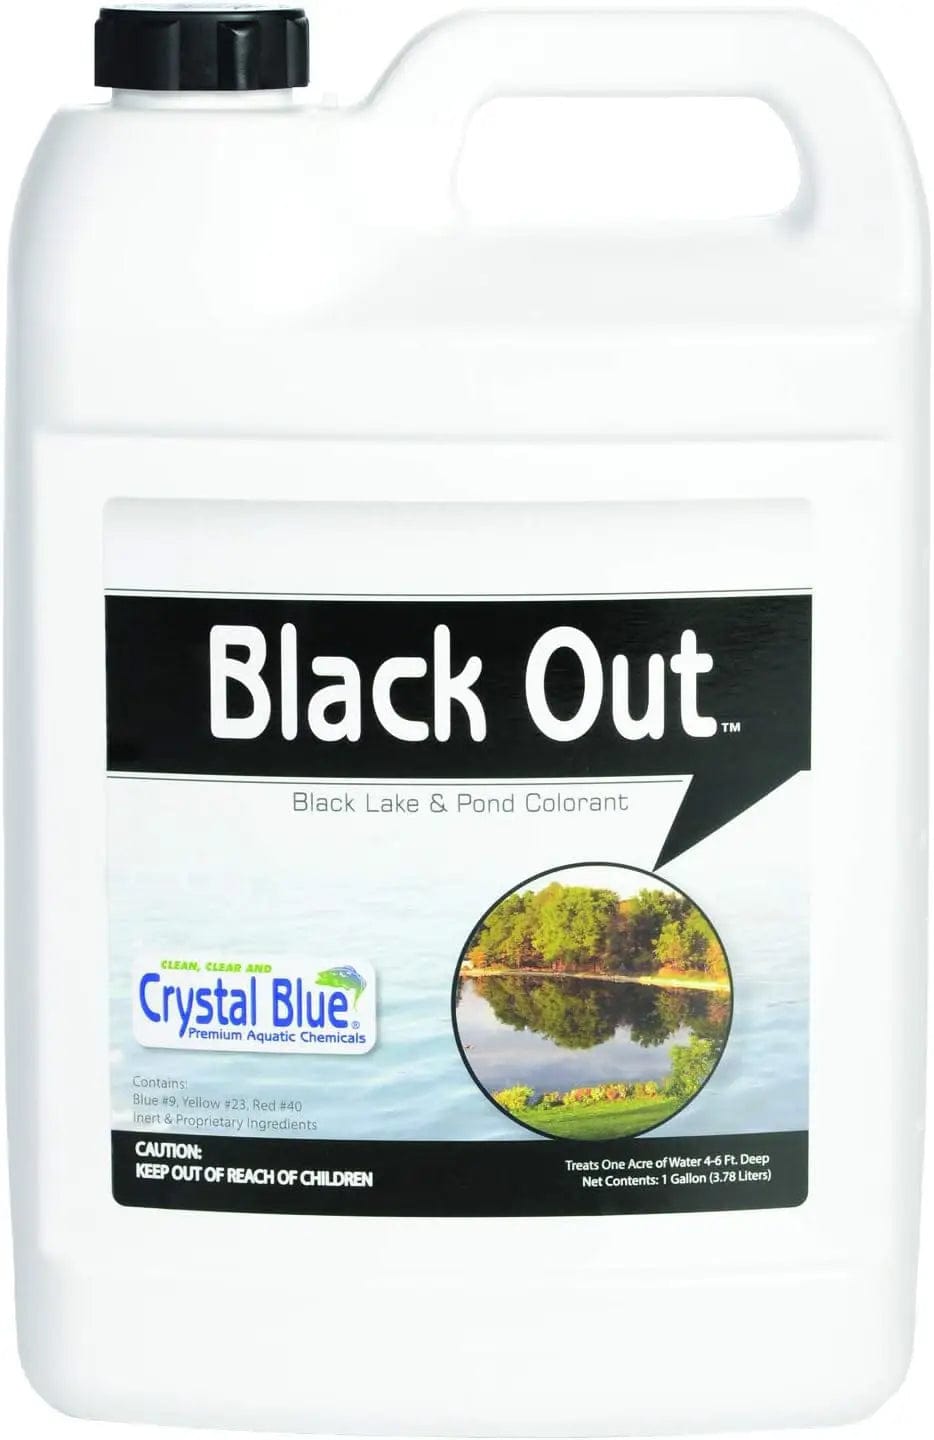 Black Out Pond Dye Gallon: Beautify Your Pond